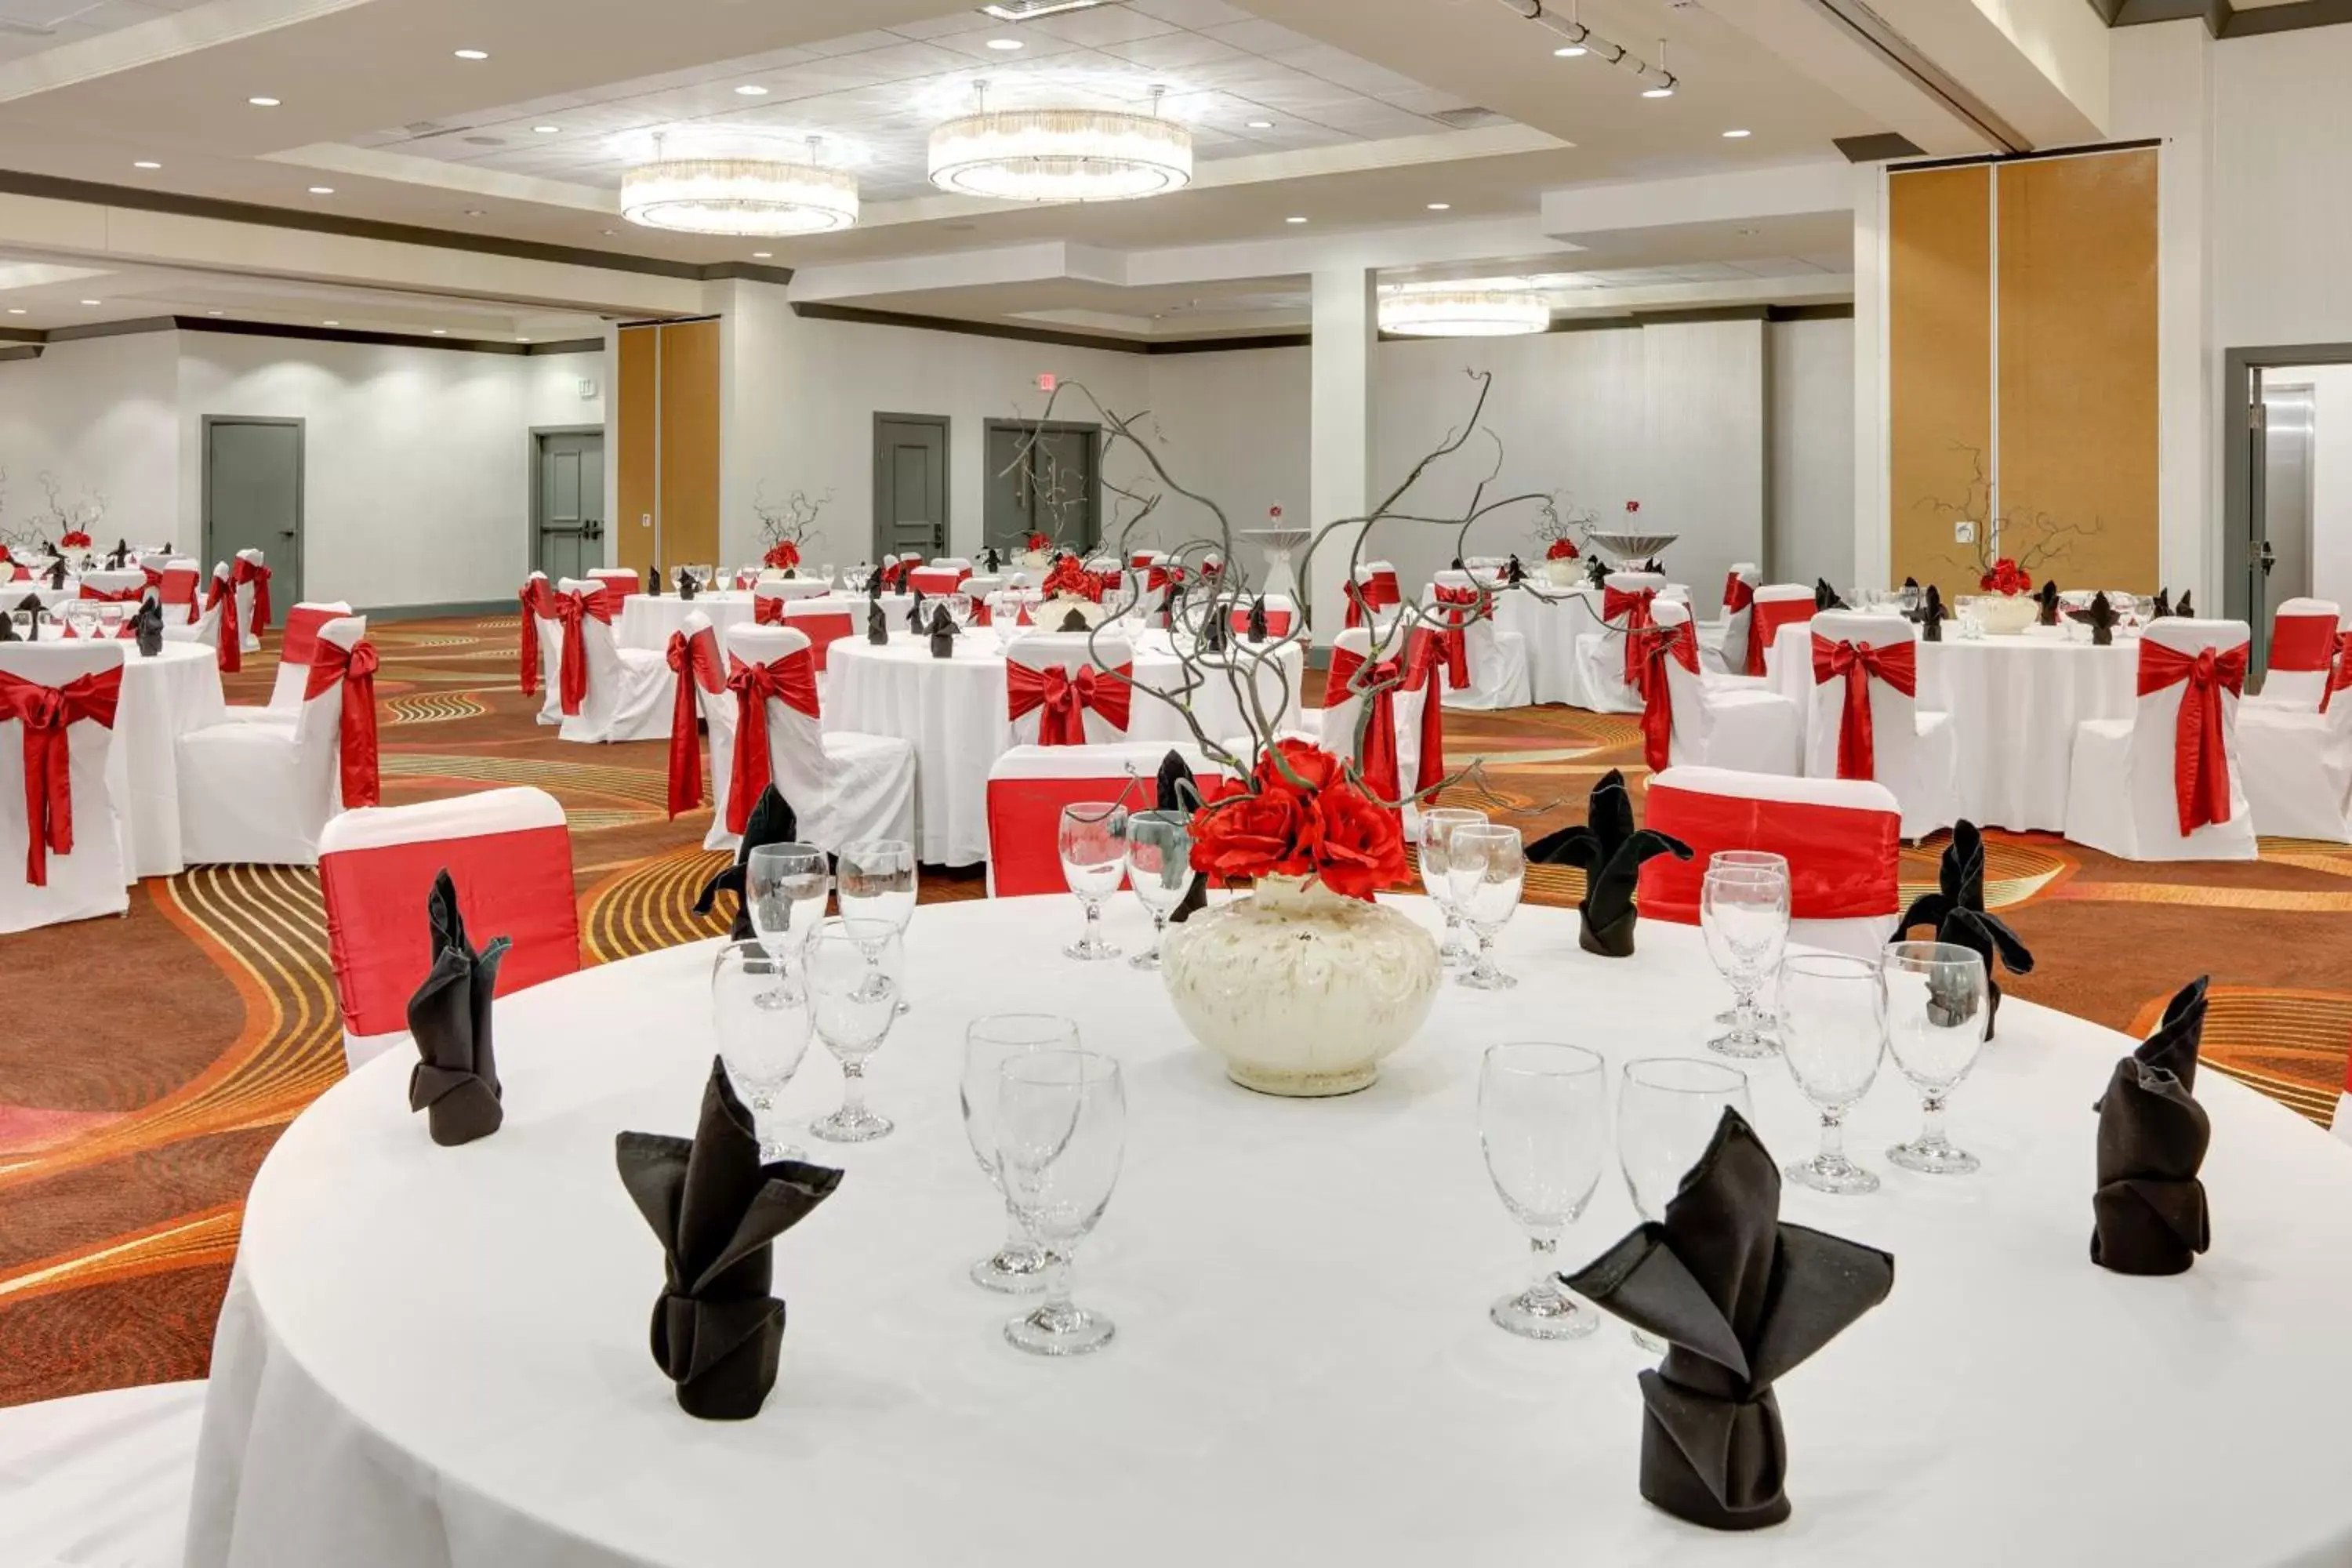 Banquet/Function facilities, Banquet Facilities in Crowne Plaza Hotel Dallas Downtown, an IHG Hotel